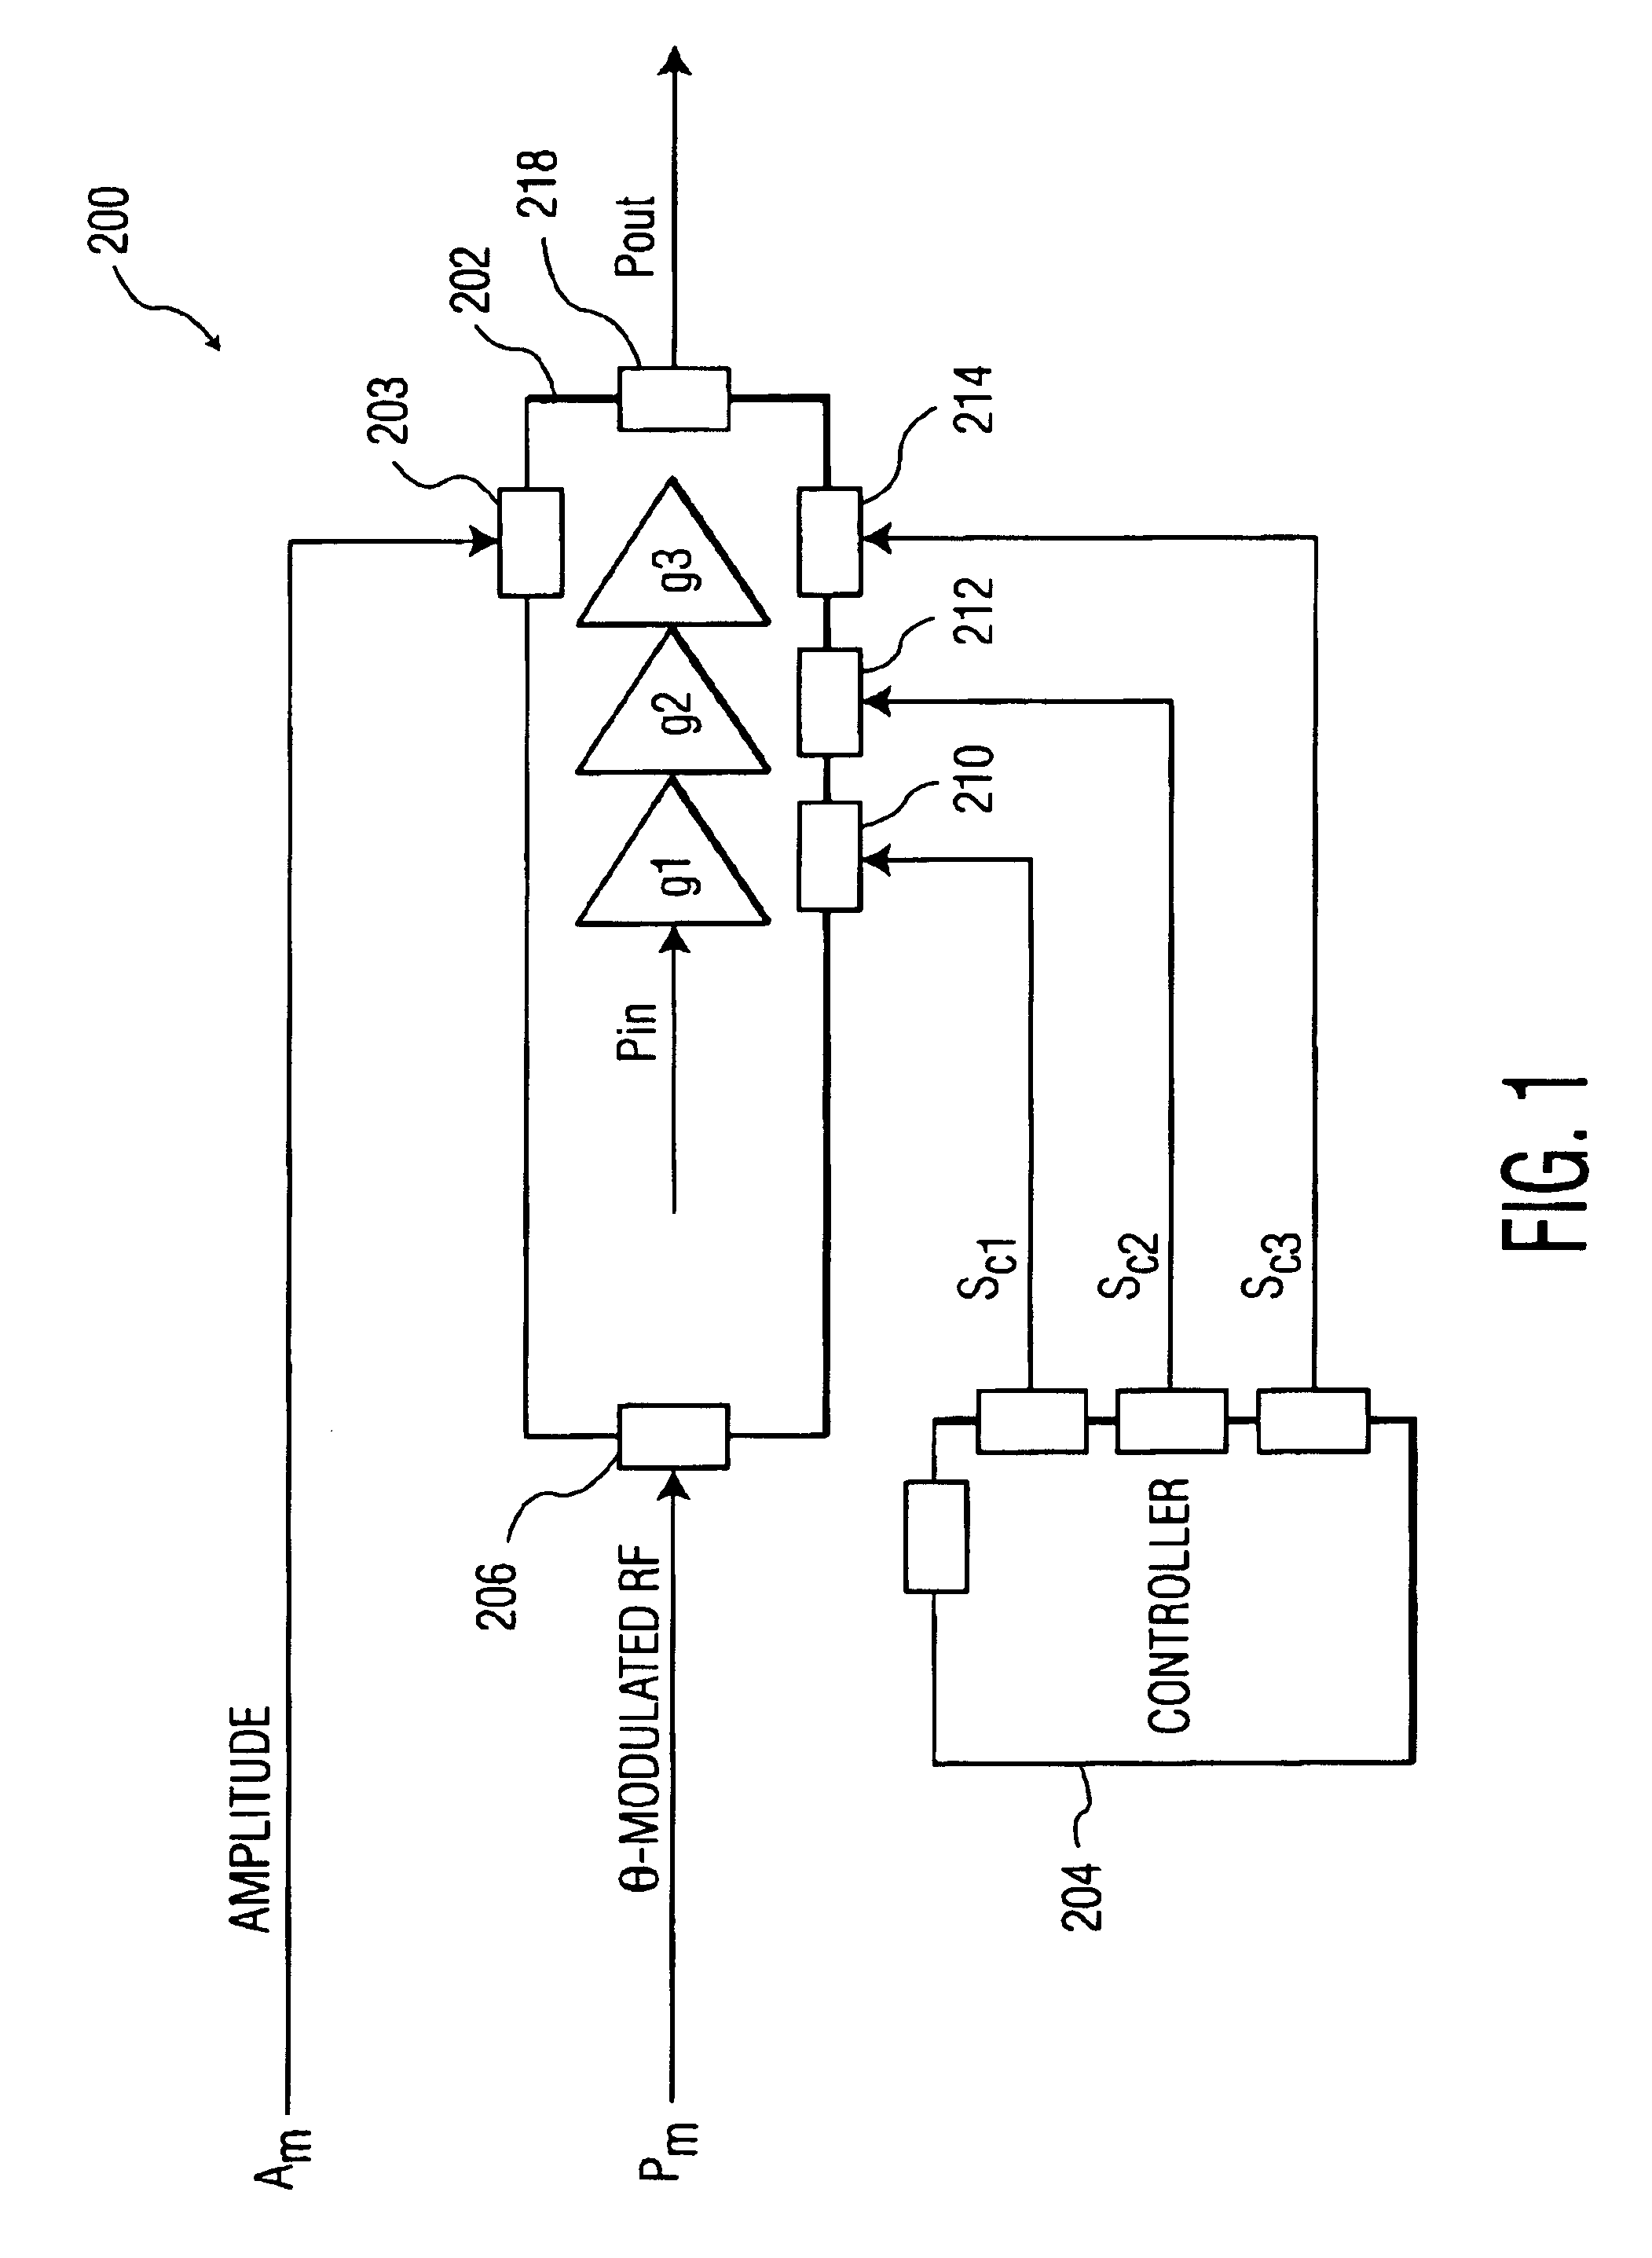 Apparatus, methods and articles of manufacture for control in an electromagnetic processor